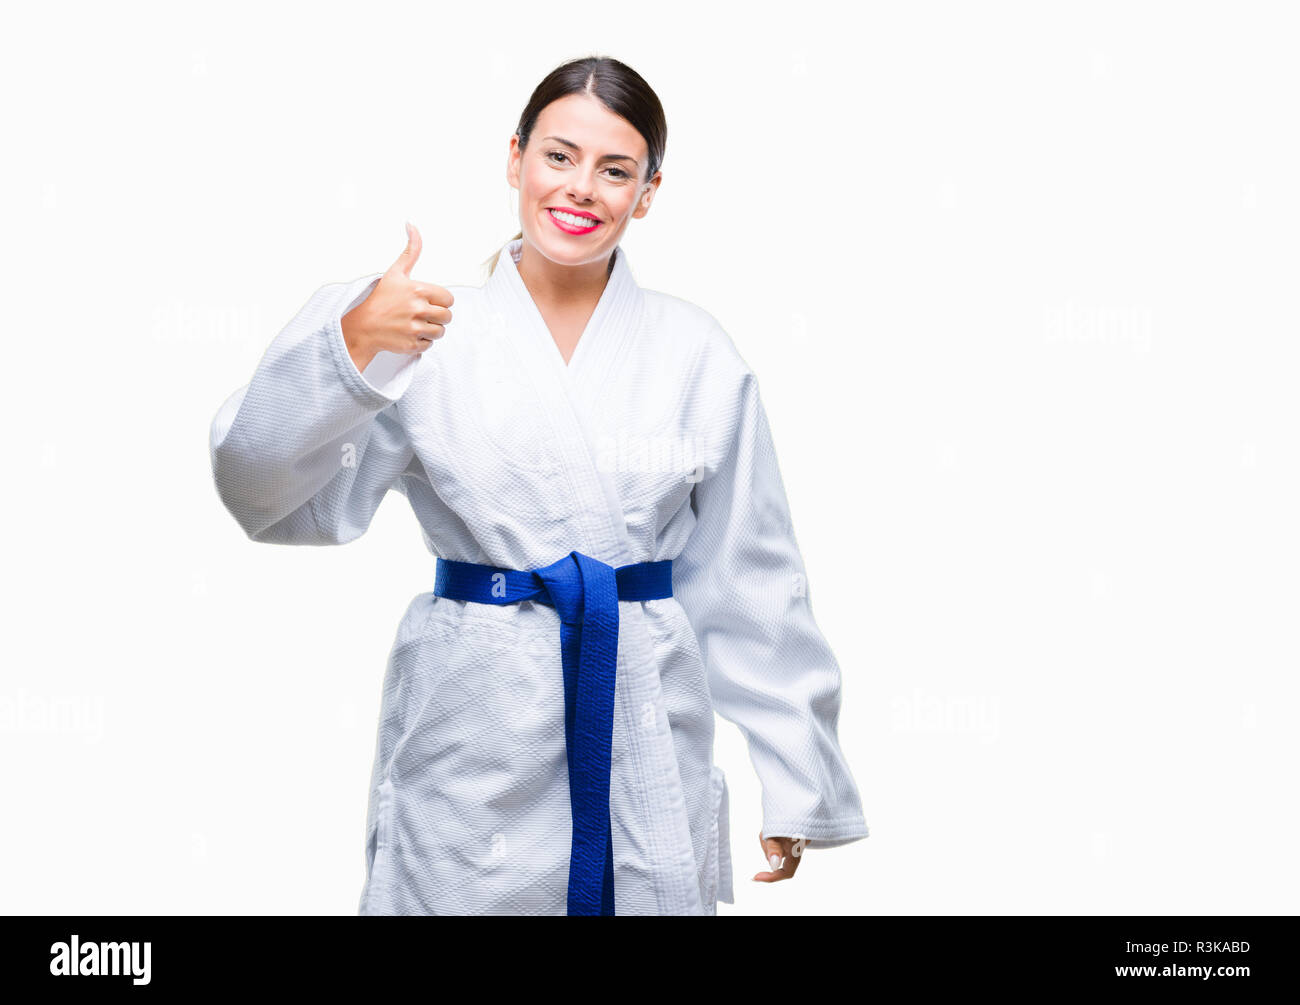 Young beautiful woman wearing karate kimono uniform over isolated background doing happy thumbs up gesture with hand. Approving expression looking at  Stock Photo